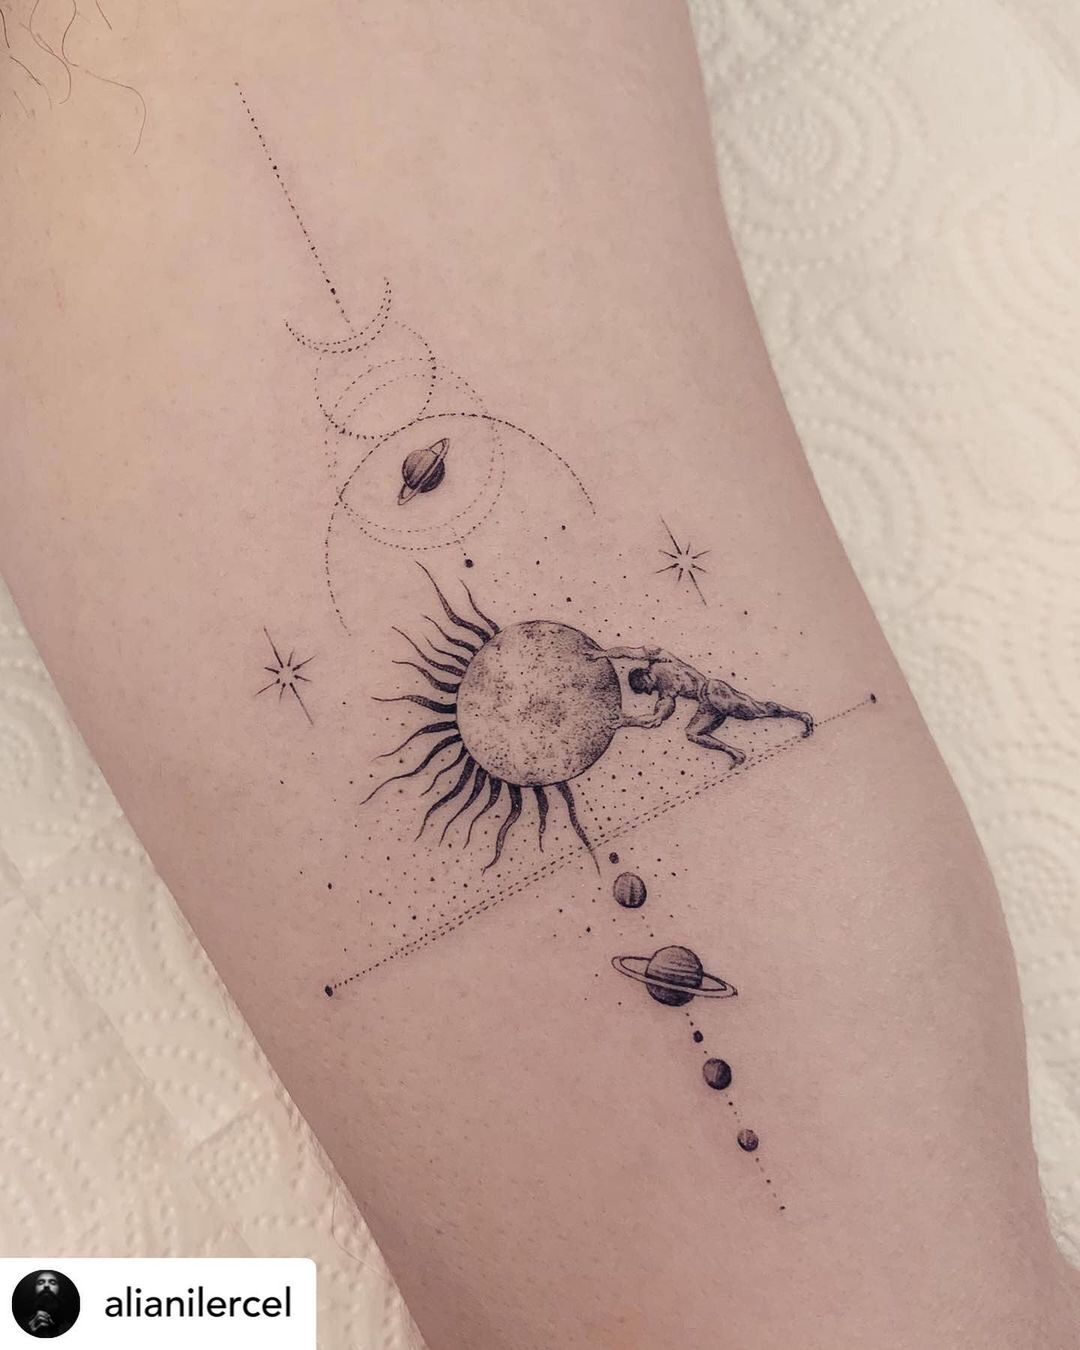 A solar system with Sisyphus is a beautiful tattoo.